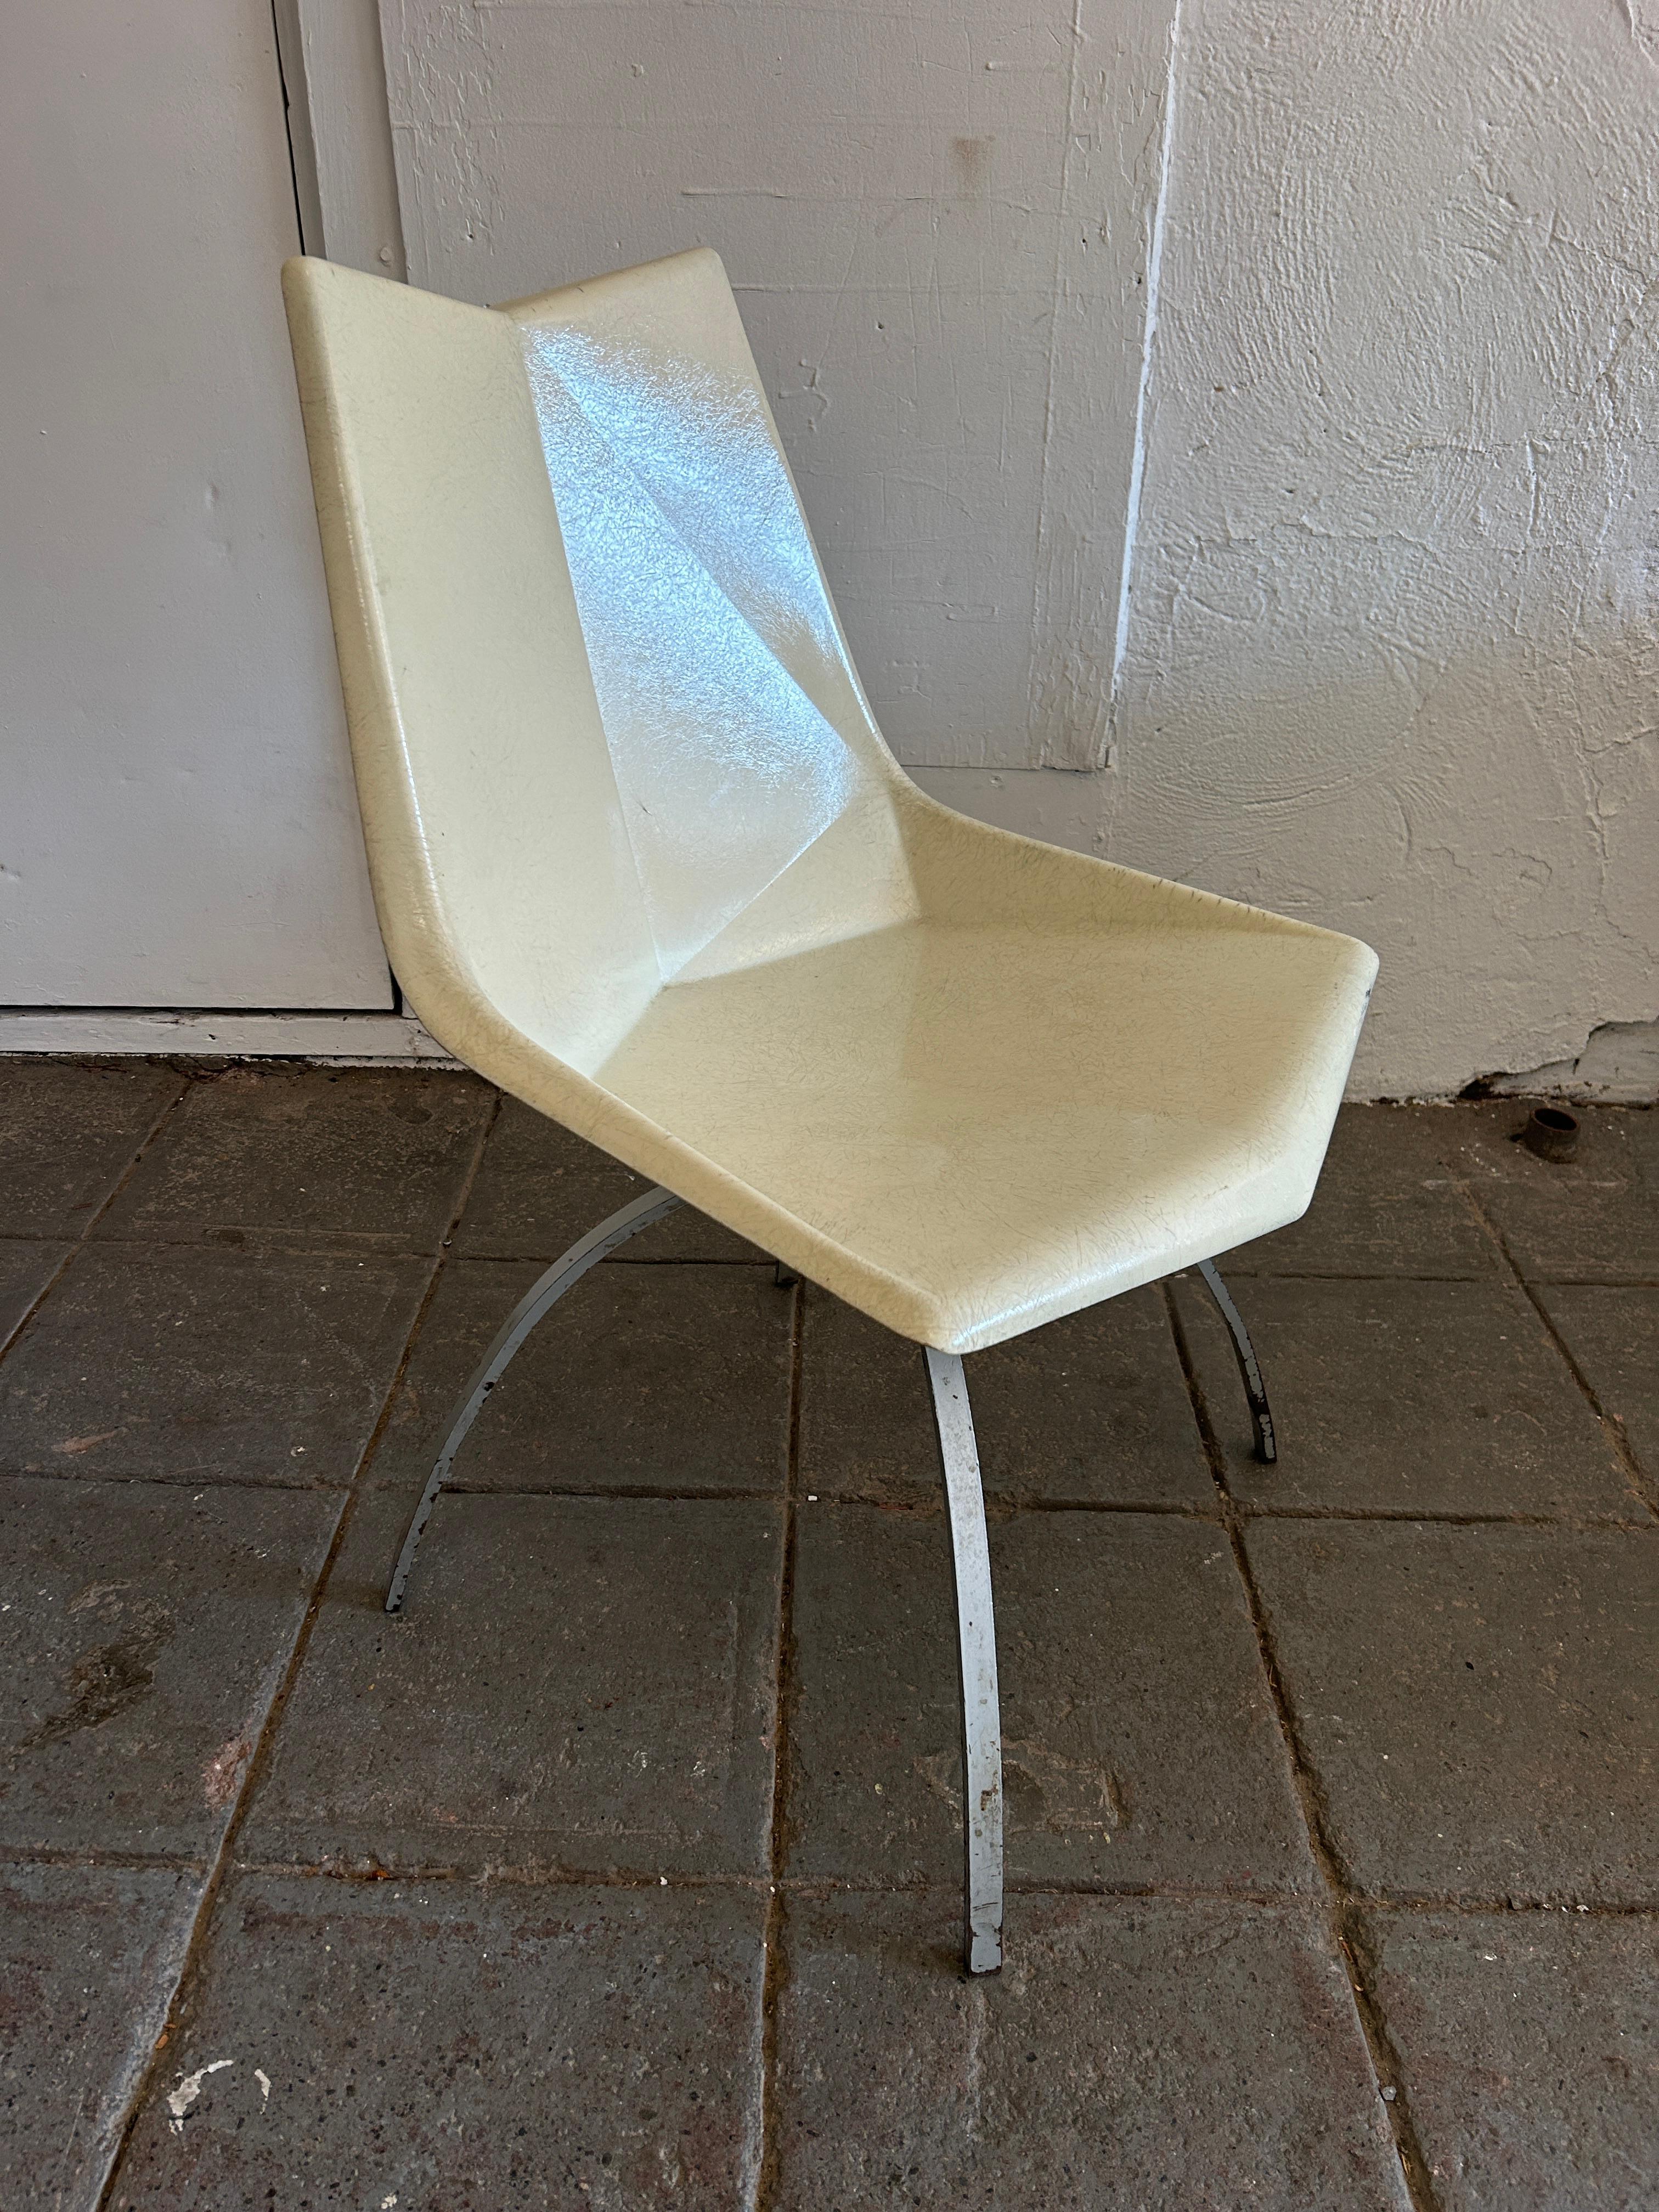  Original Midcentury white Paul McCobb Origami Fiberglass Chair spider base In Good Condition For Sale In BROOKLYN, NY